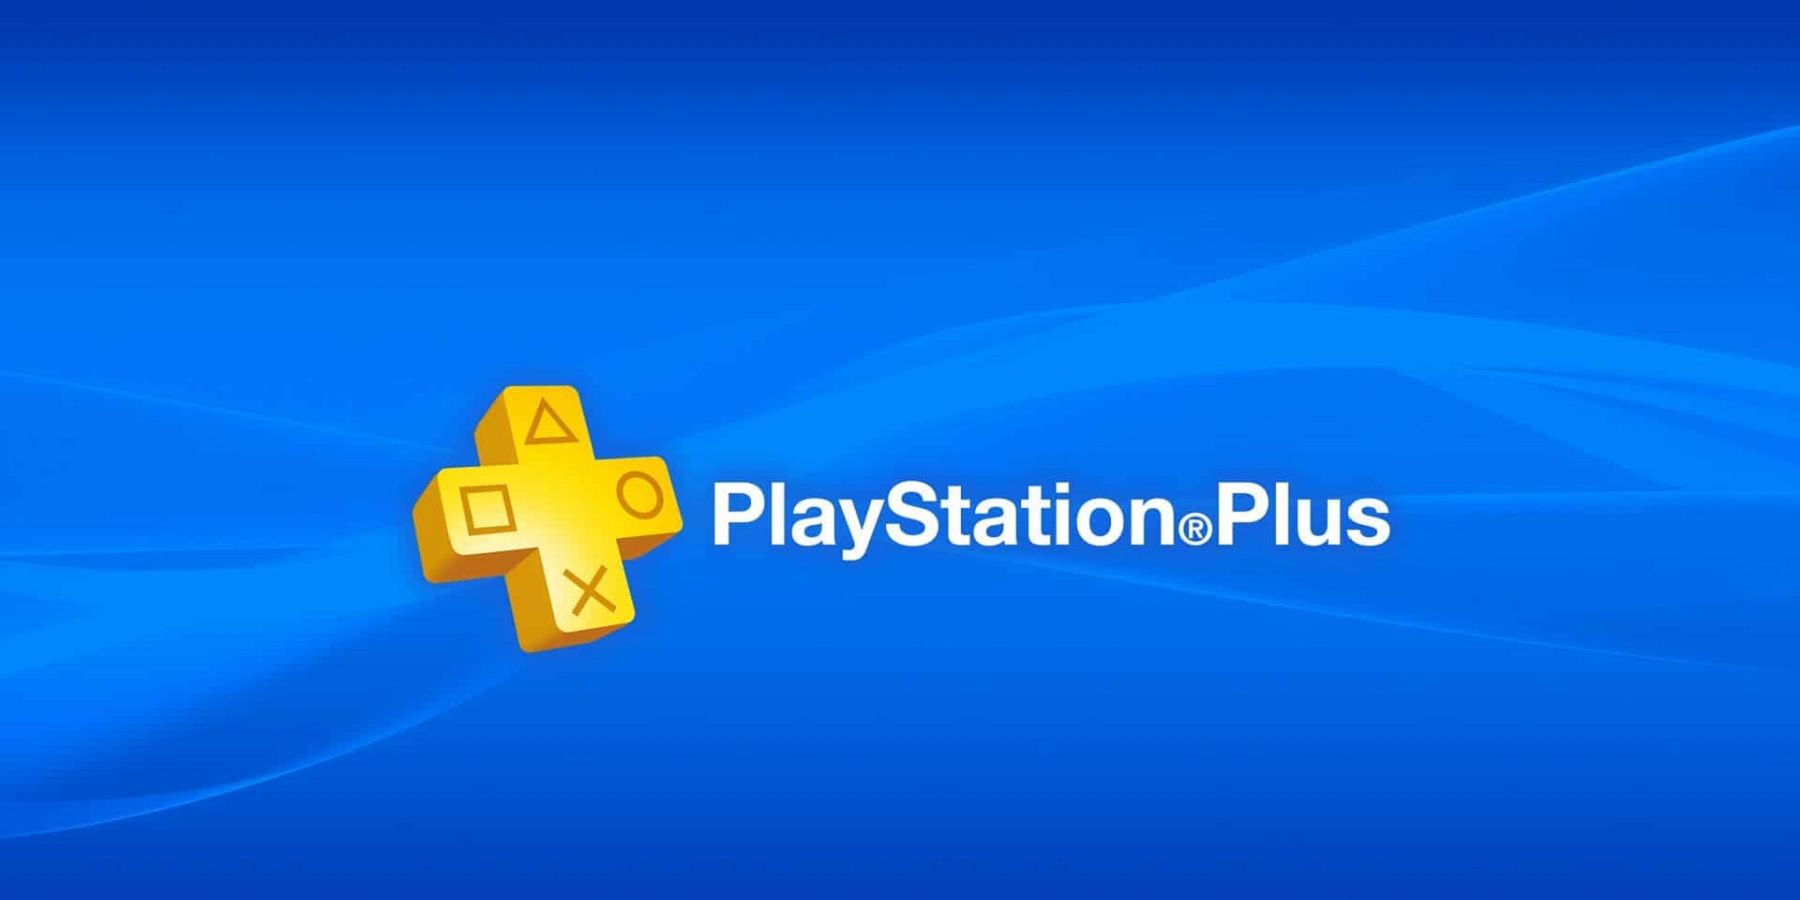 PS Plus Cyber Monday Deal Gets Players a Year for Cheap